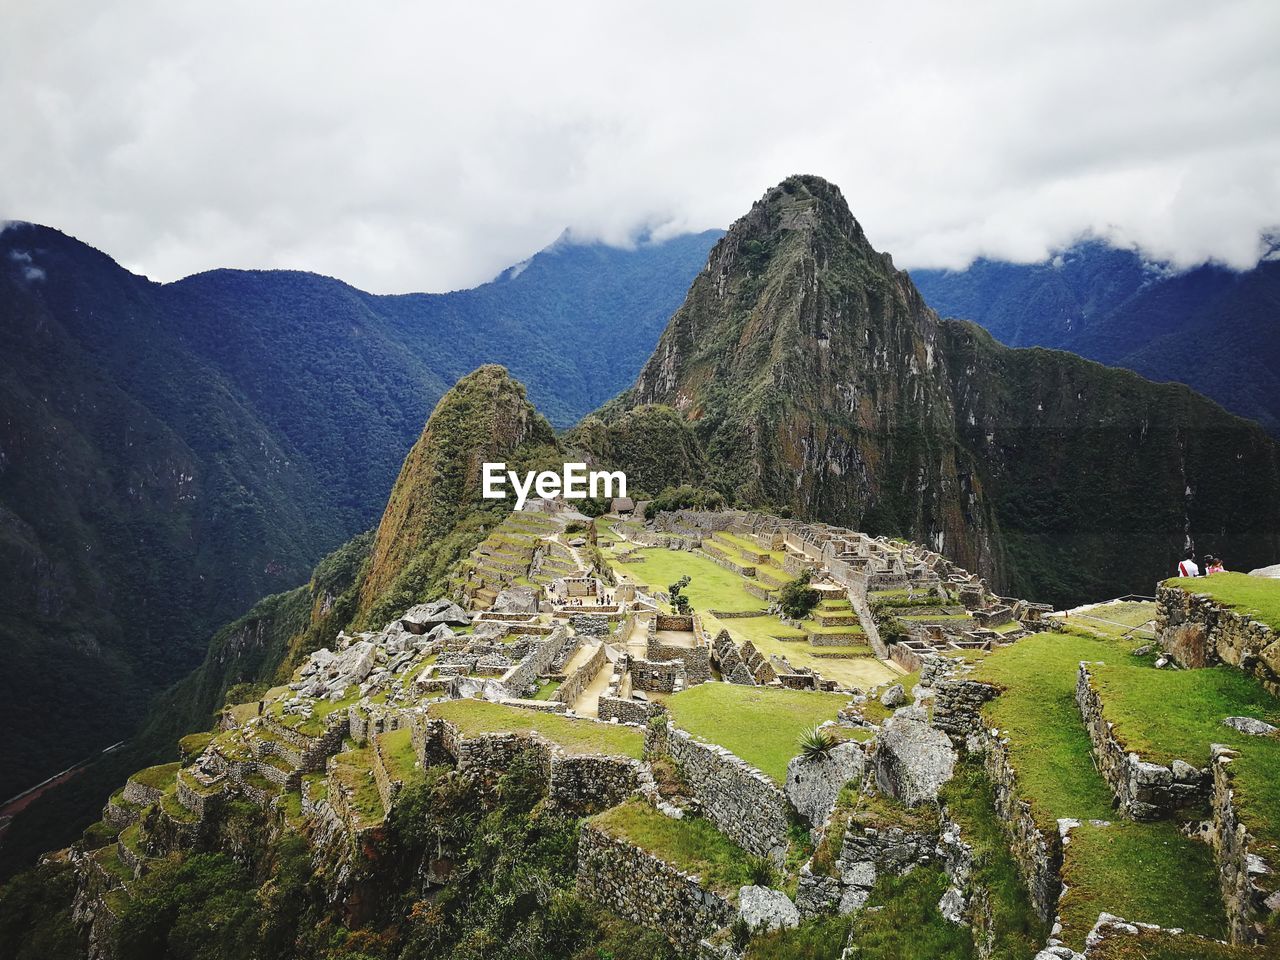 Machu picchu with mountain range in background